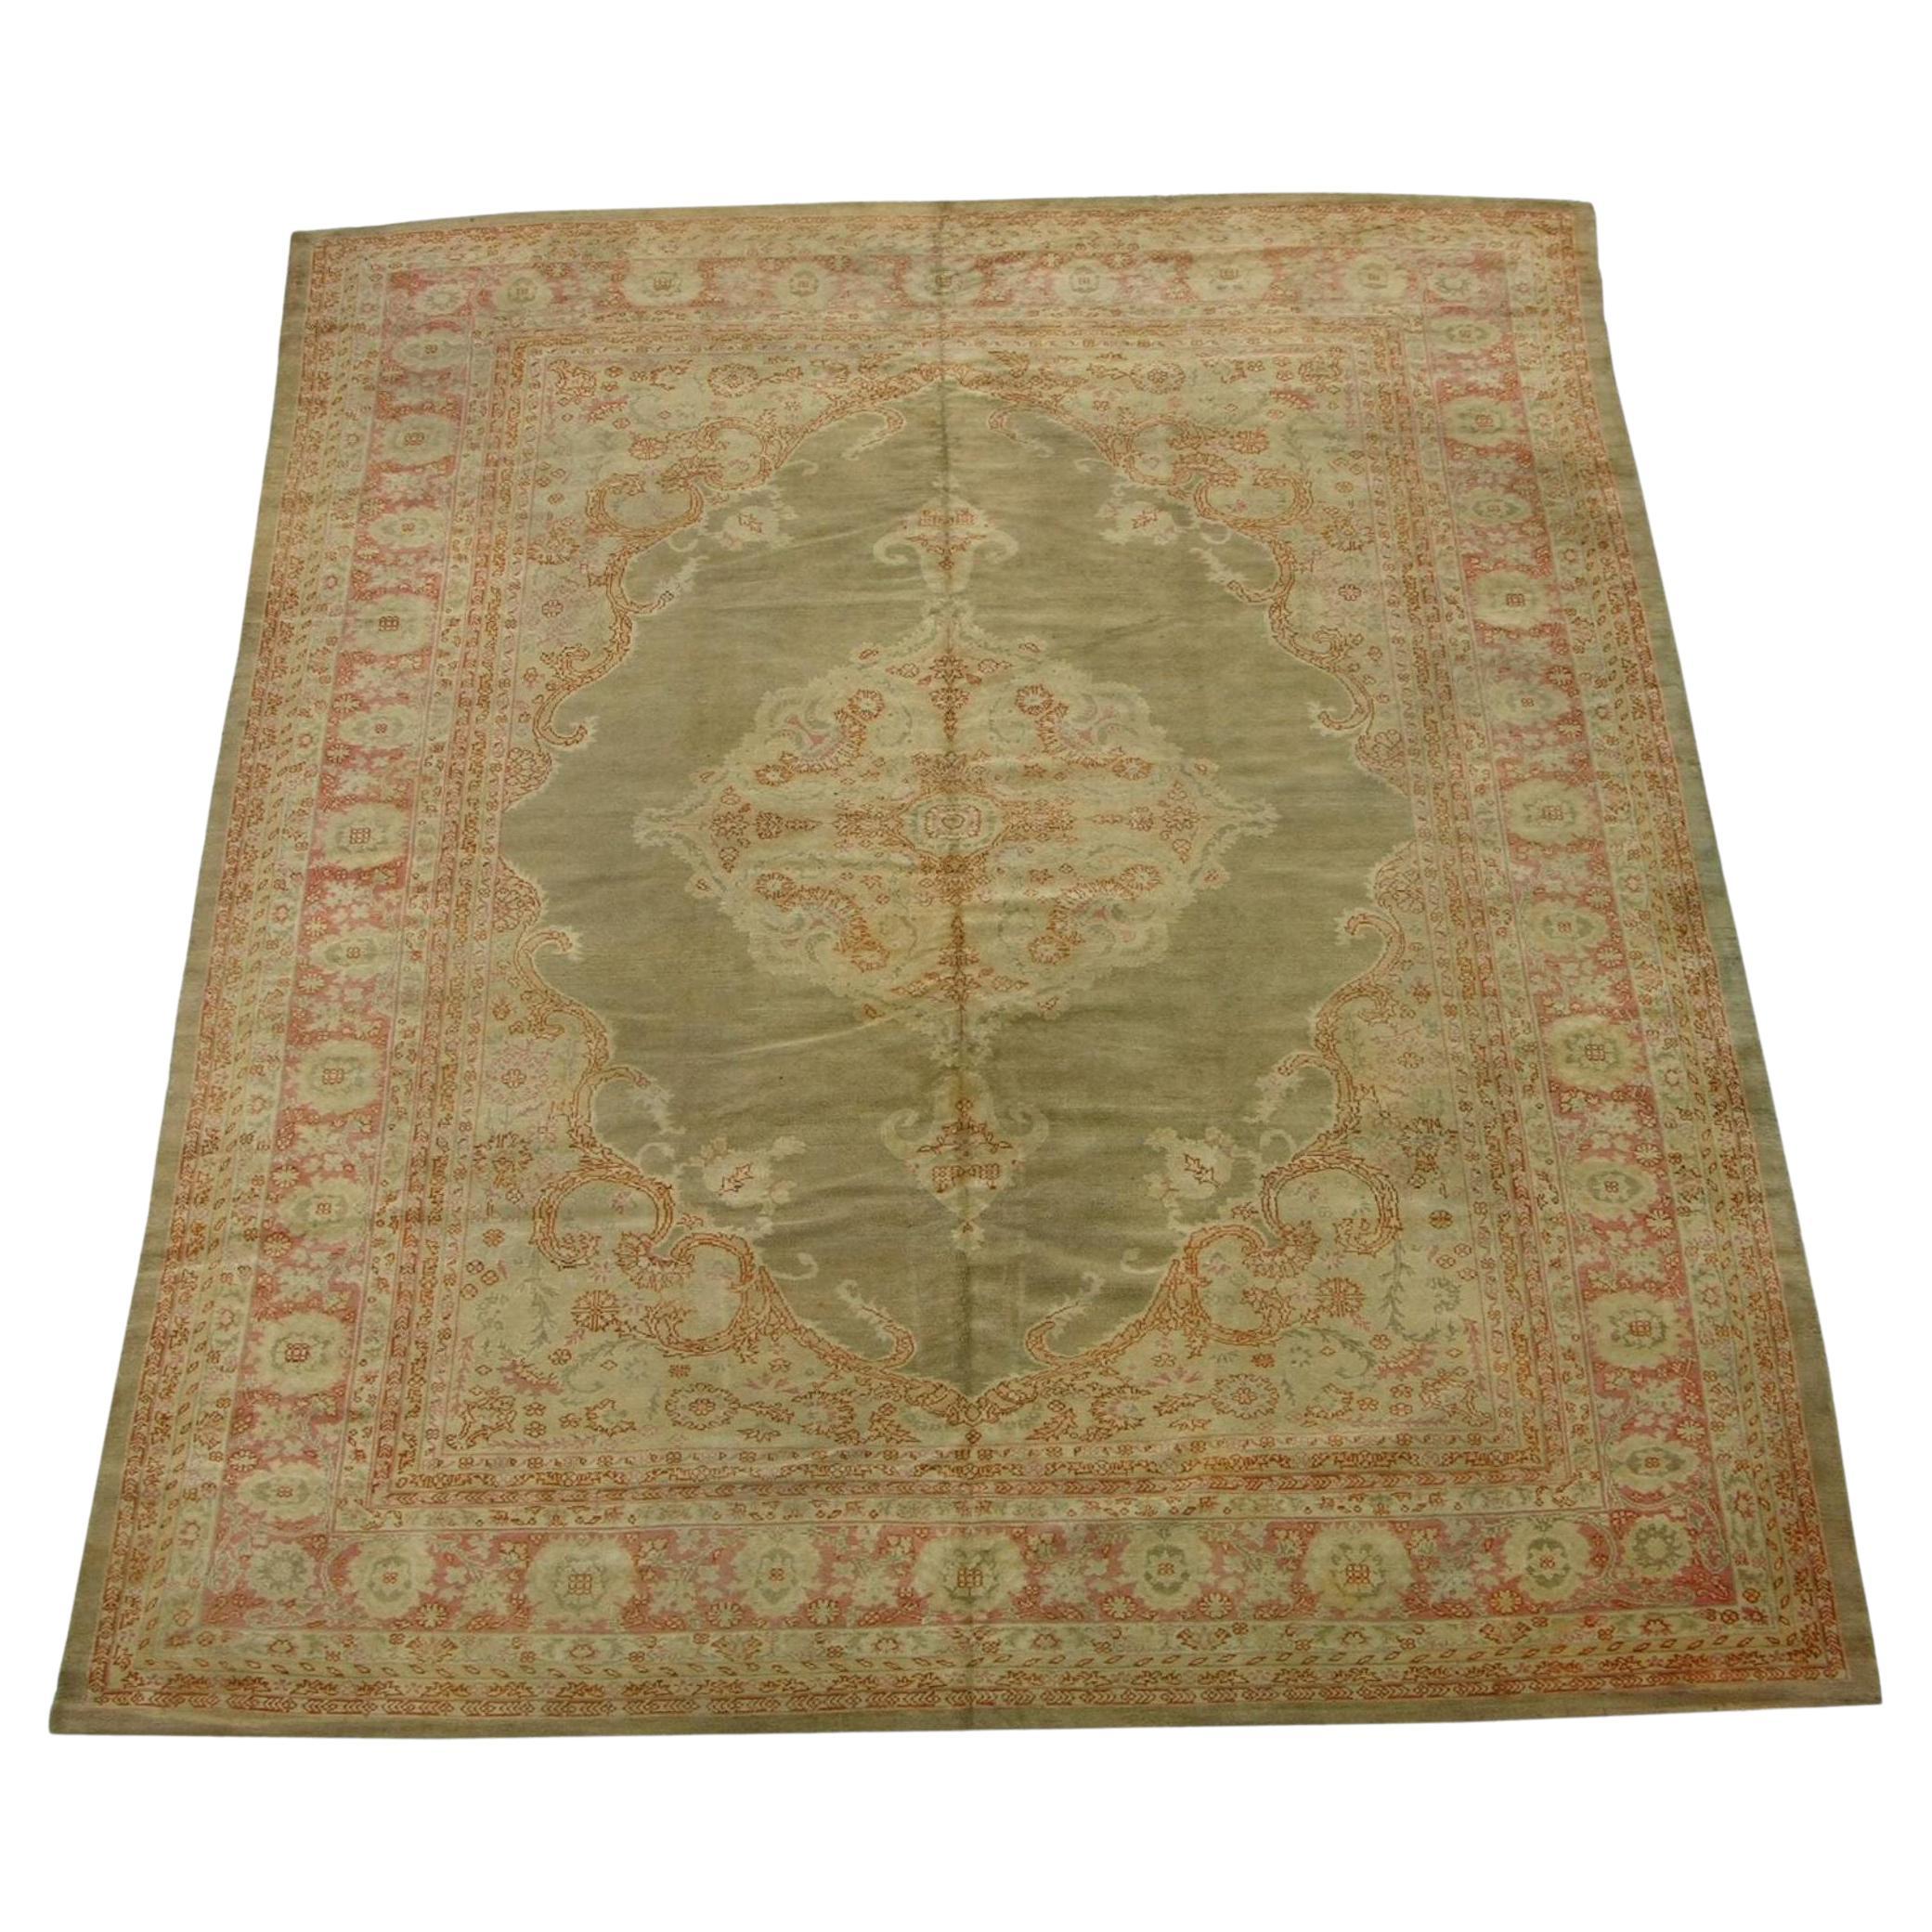 1920s Antique Indian Rug - 14'10'' X 11'7'' For Sale